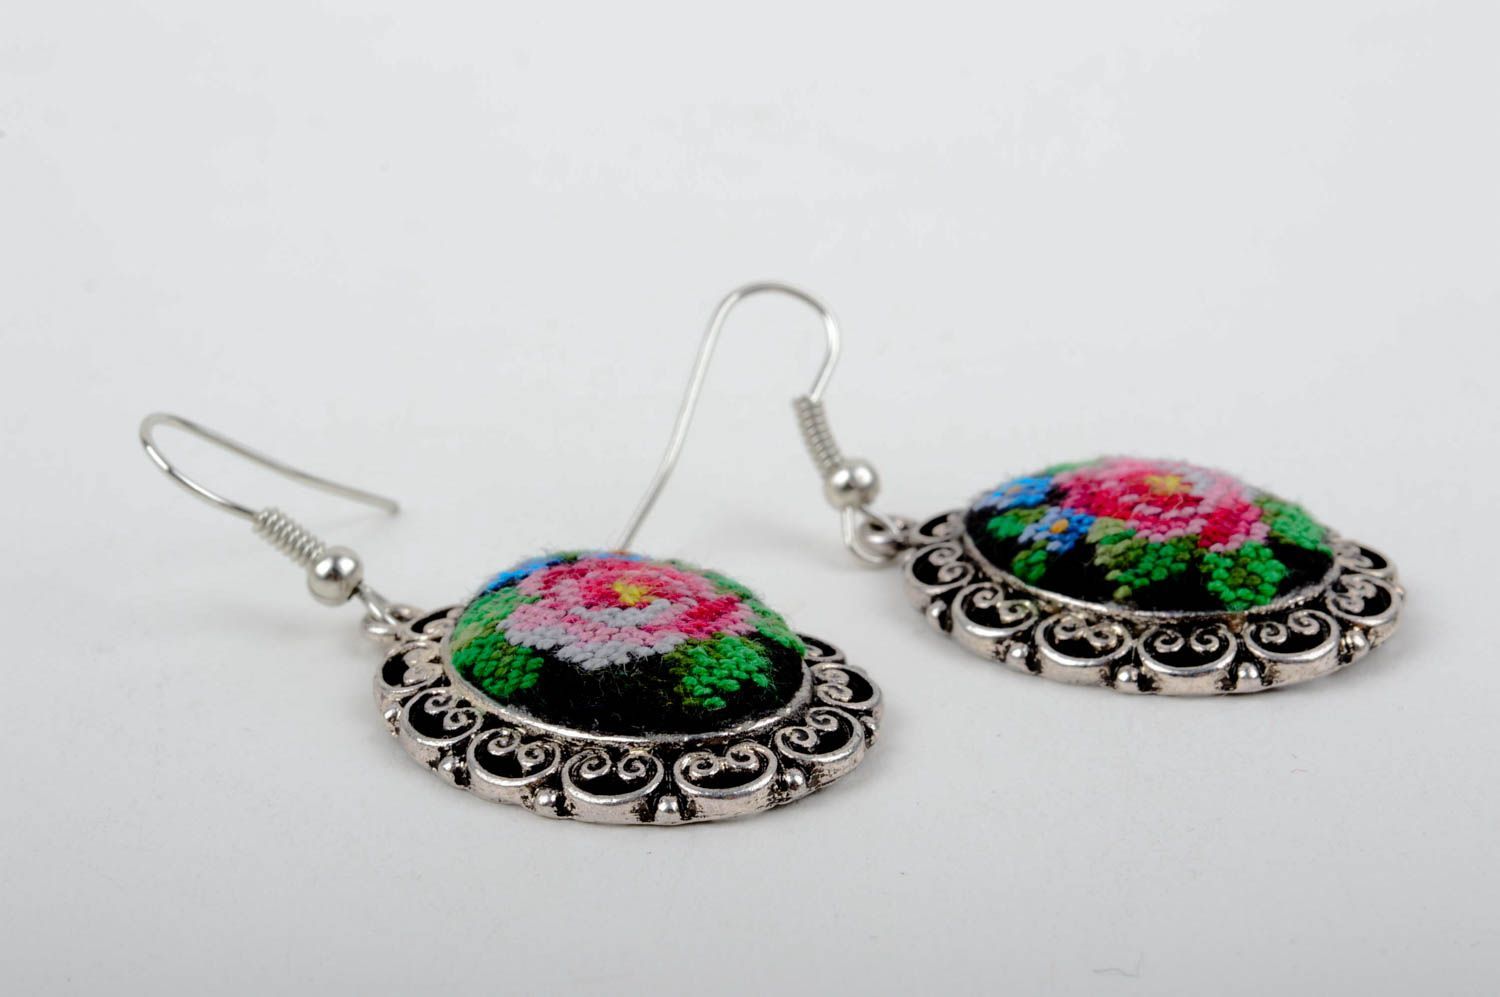 Handmade metal earrings embroidered earrings cross stitch ideas gifts for her photo 3